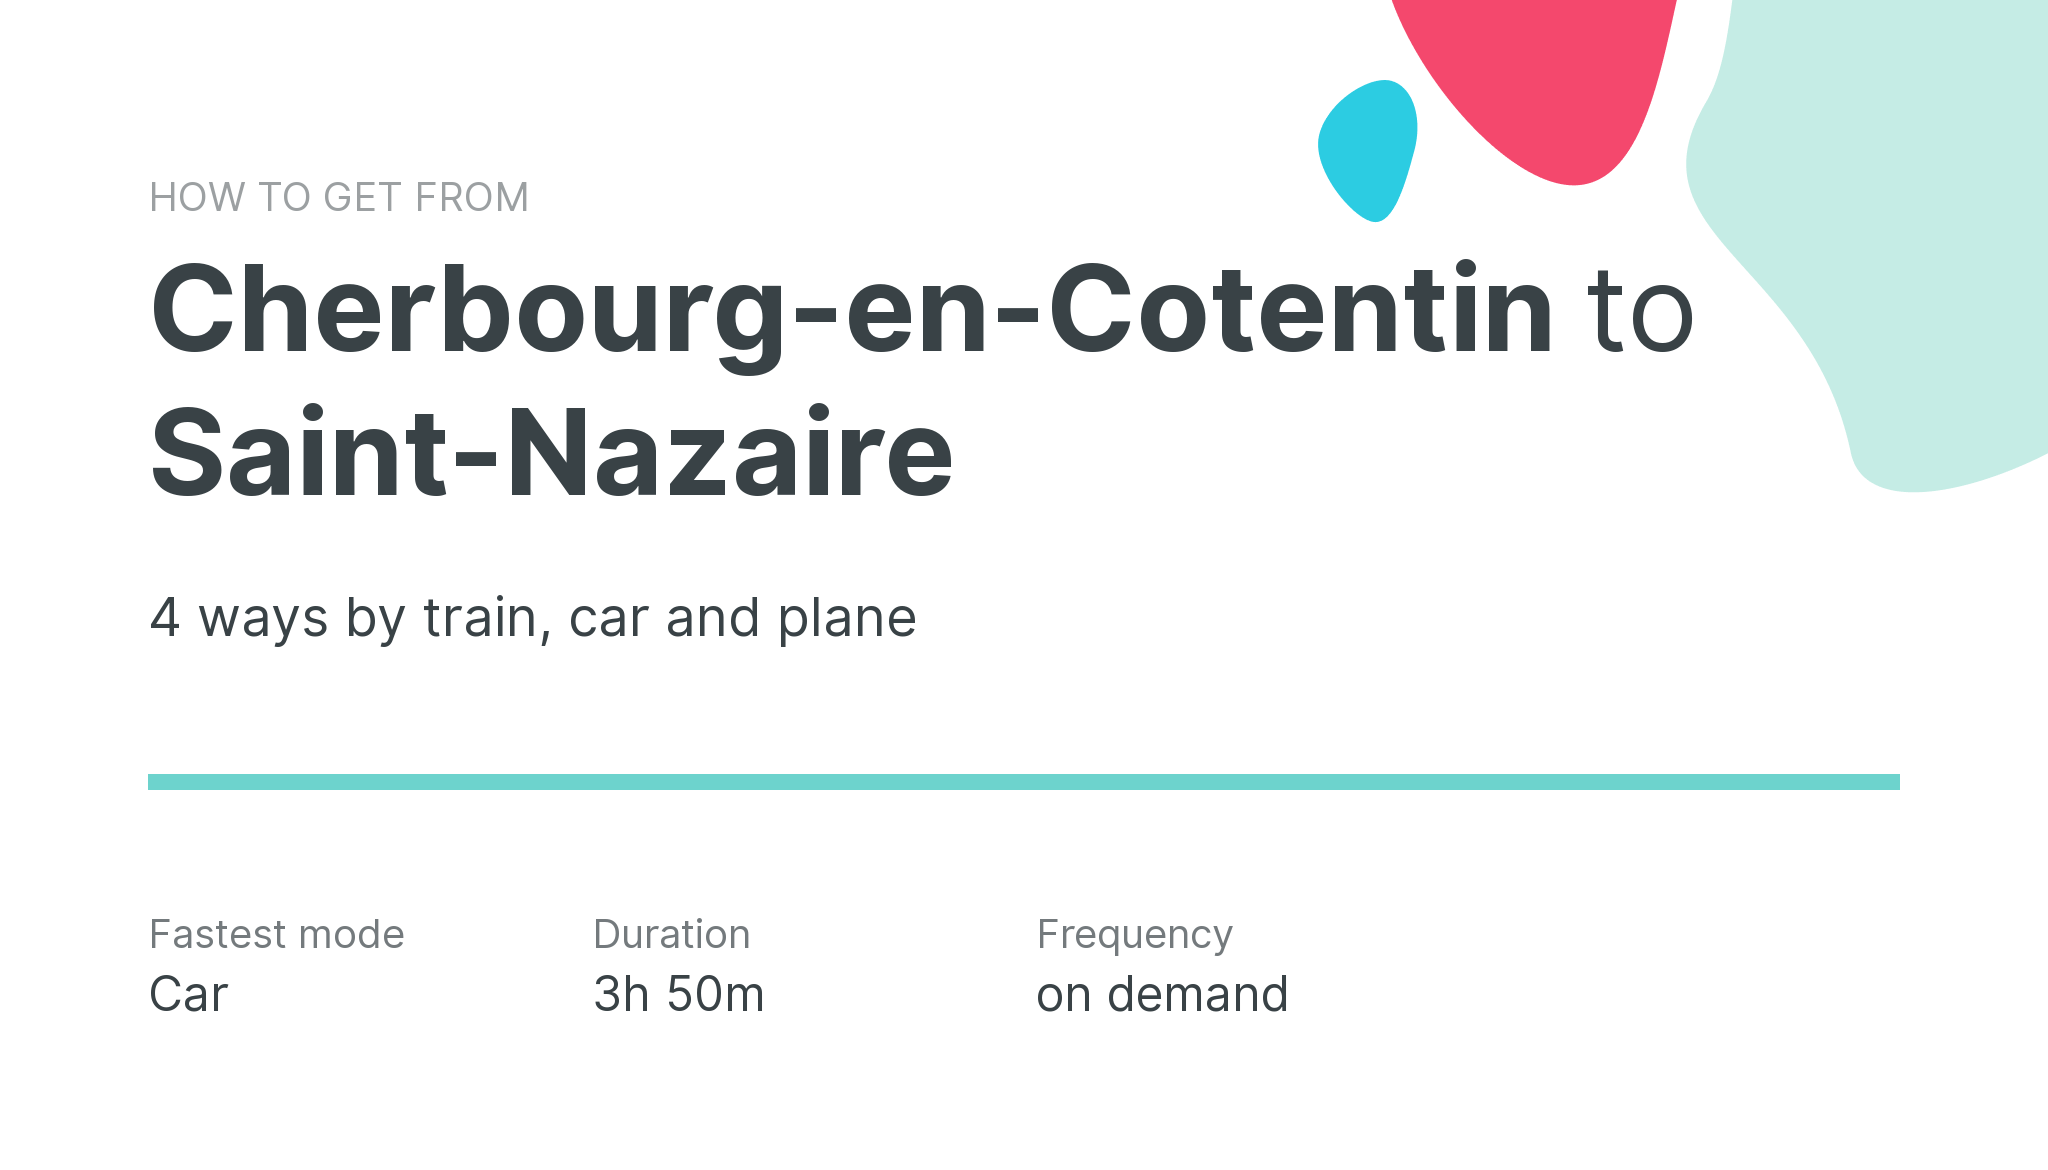 How do I get from Cherbourg-en-Cotentin to Saint-Nazaire